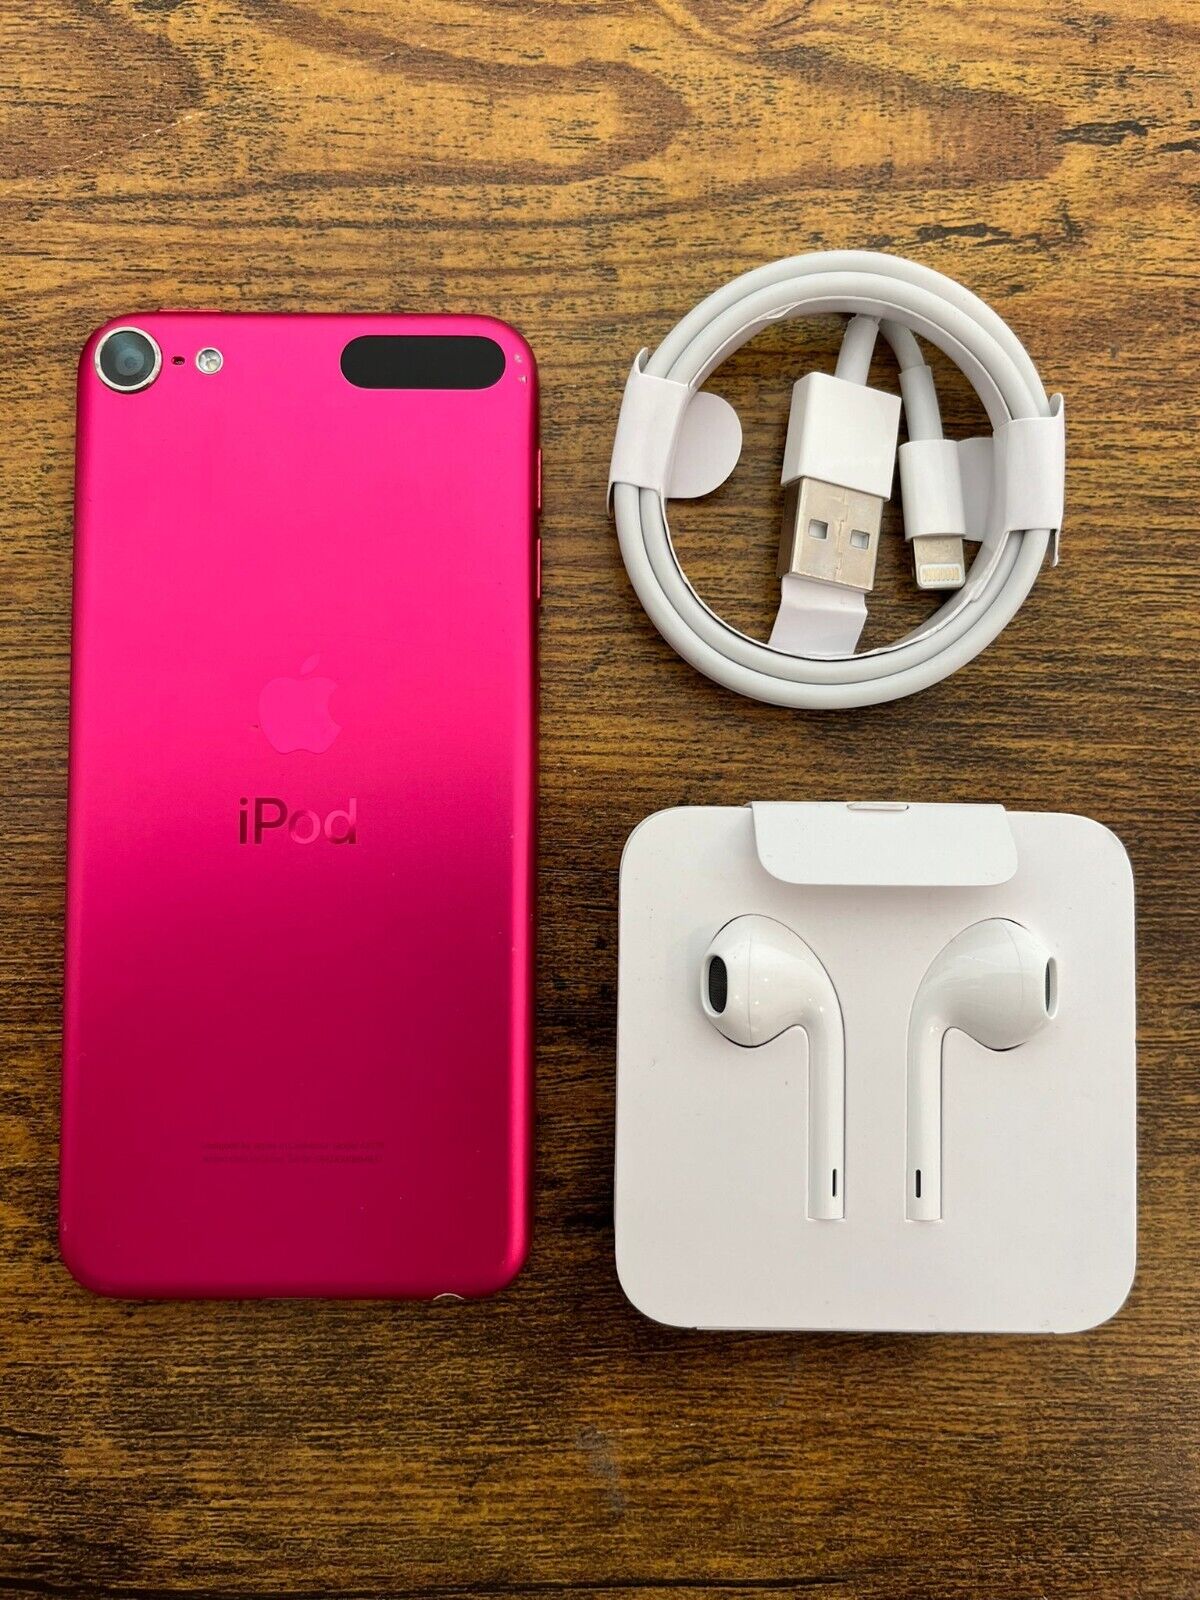 Apple iPod Touch (7th Generation) - Pink, 32GB for sale online | eBay